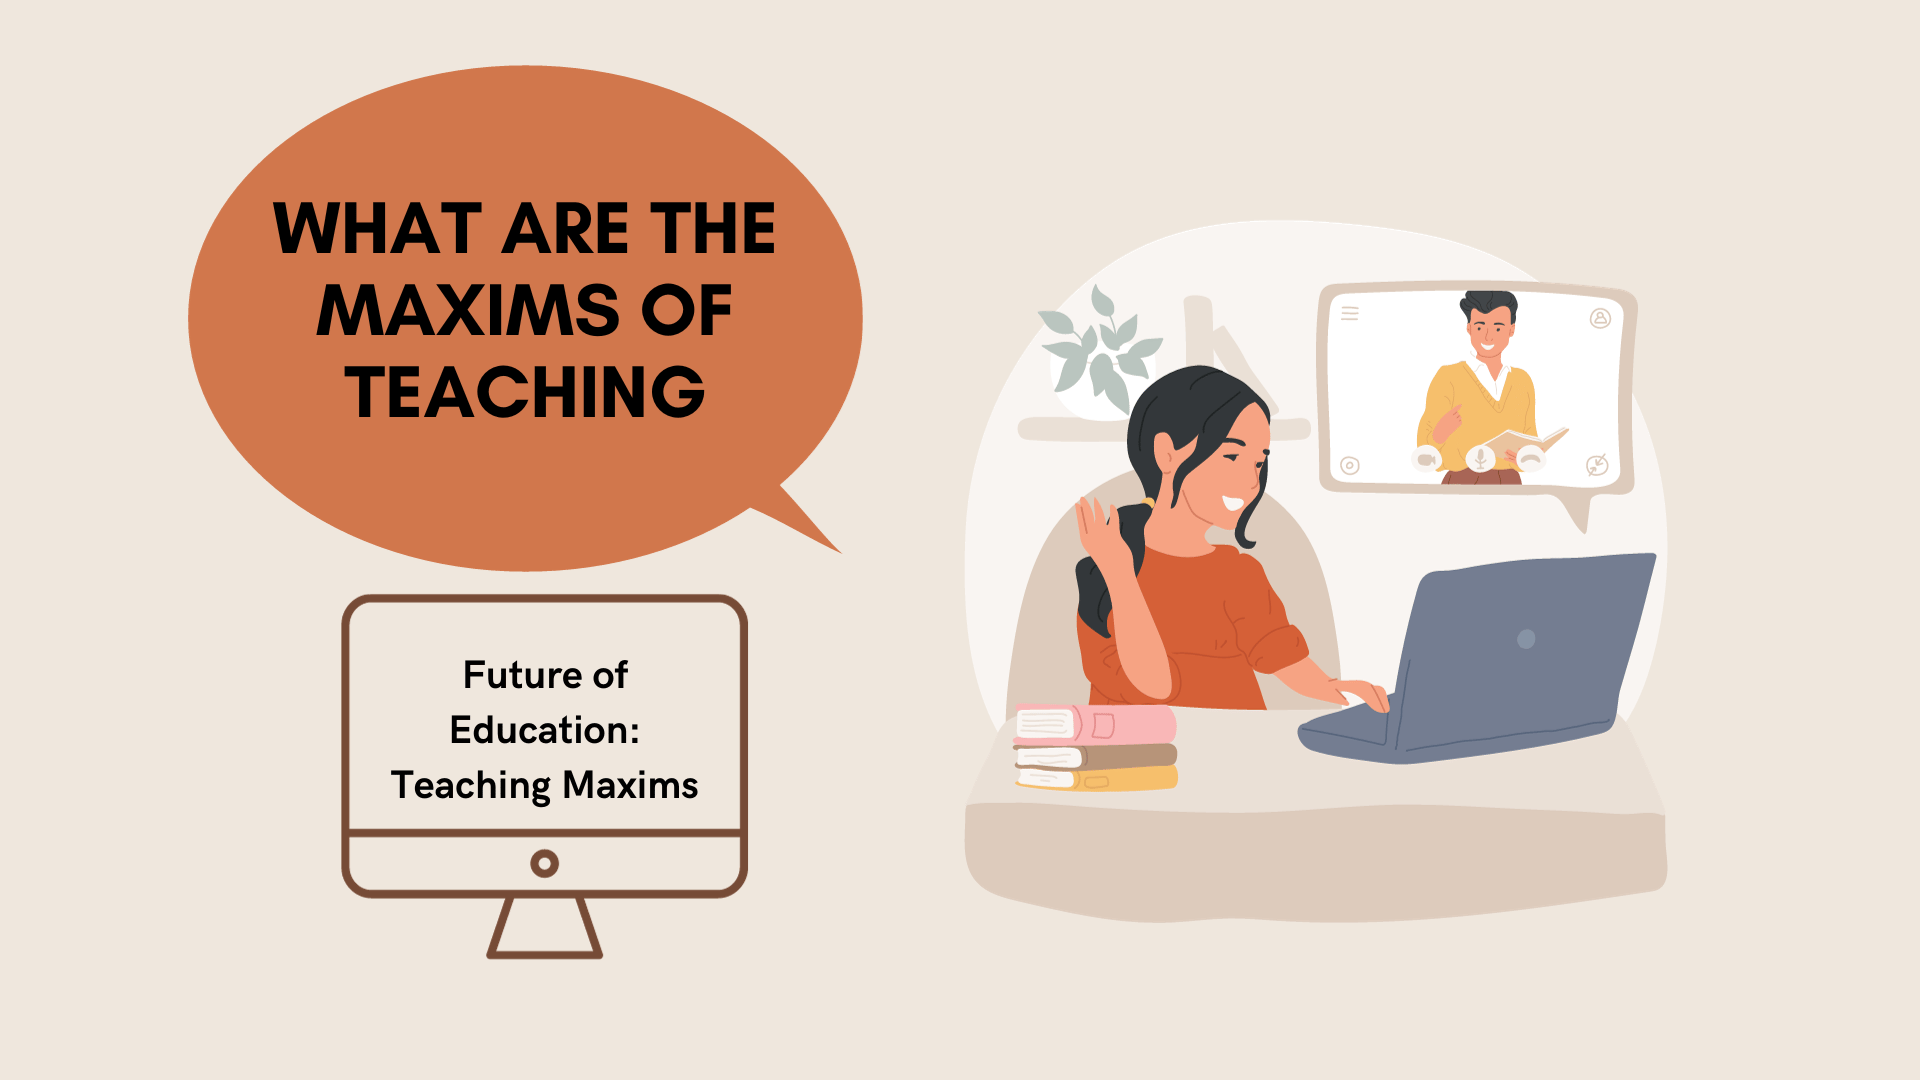 What are the maxims of teaching